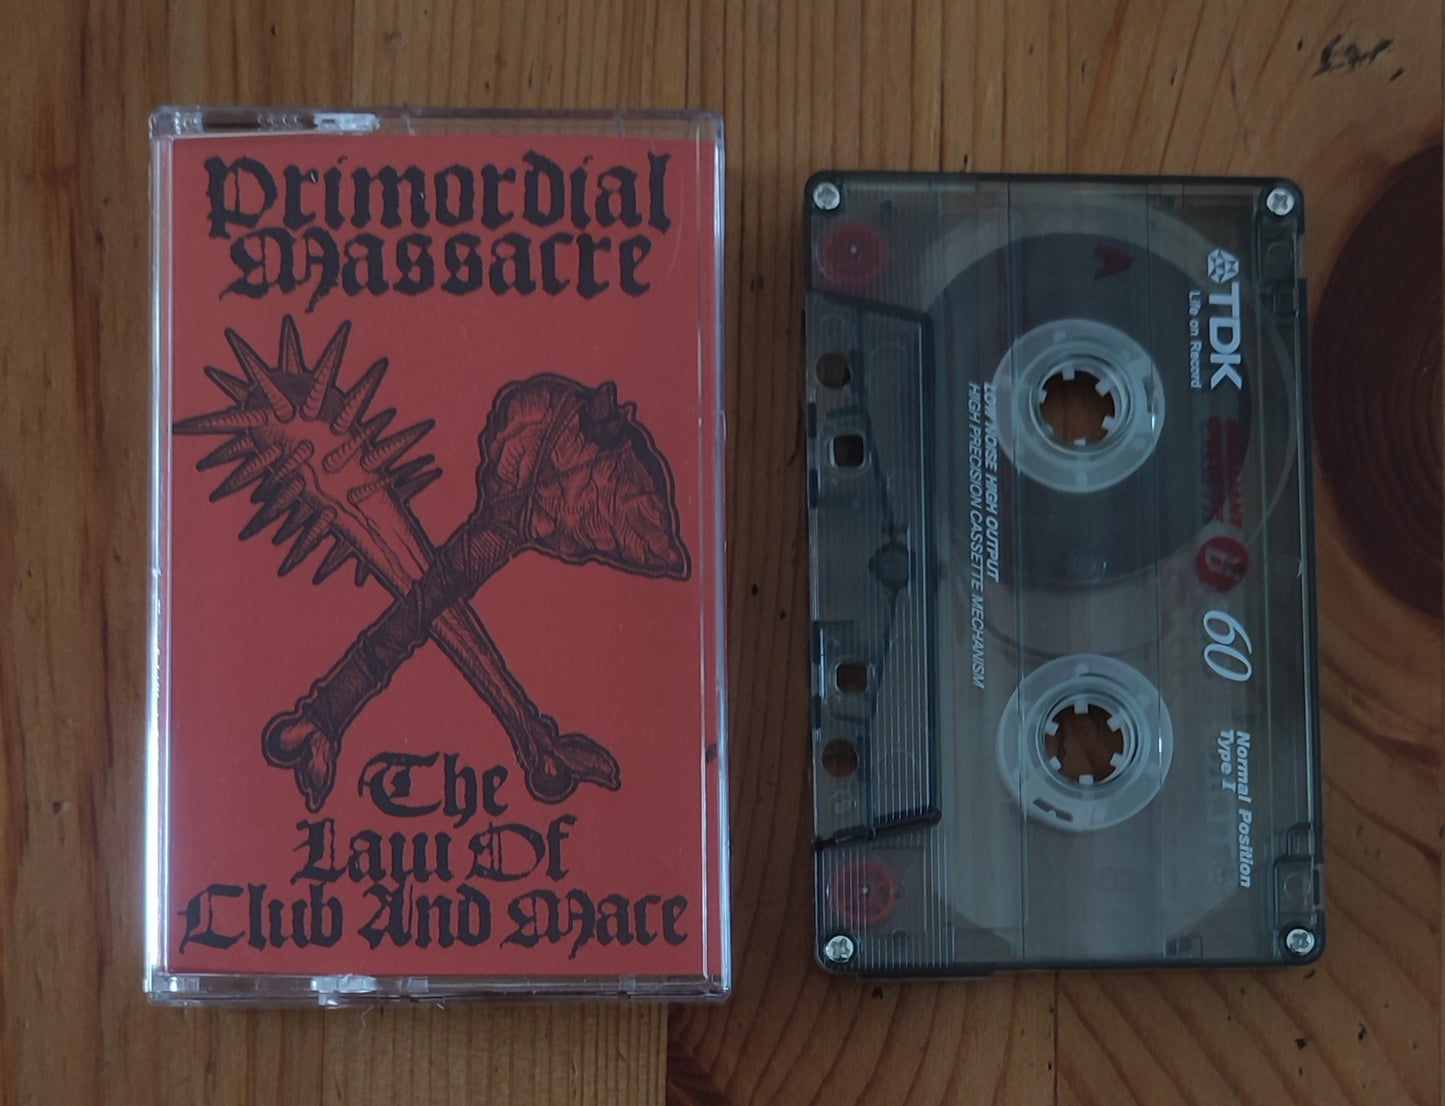 Primordial Massacre (Int) "The Law Of Club And Mace" - Tape